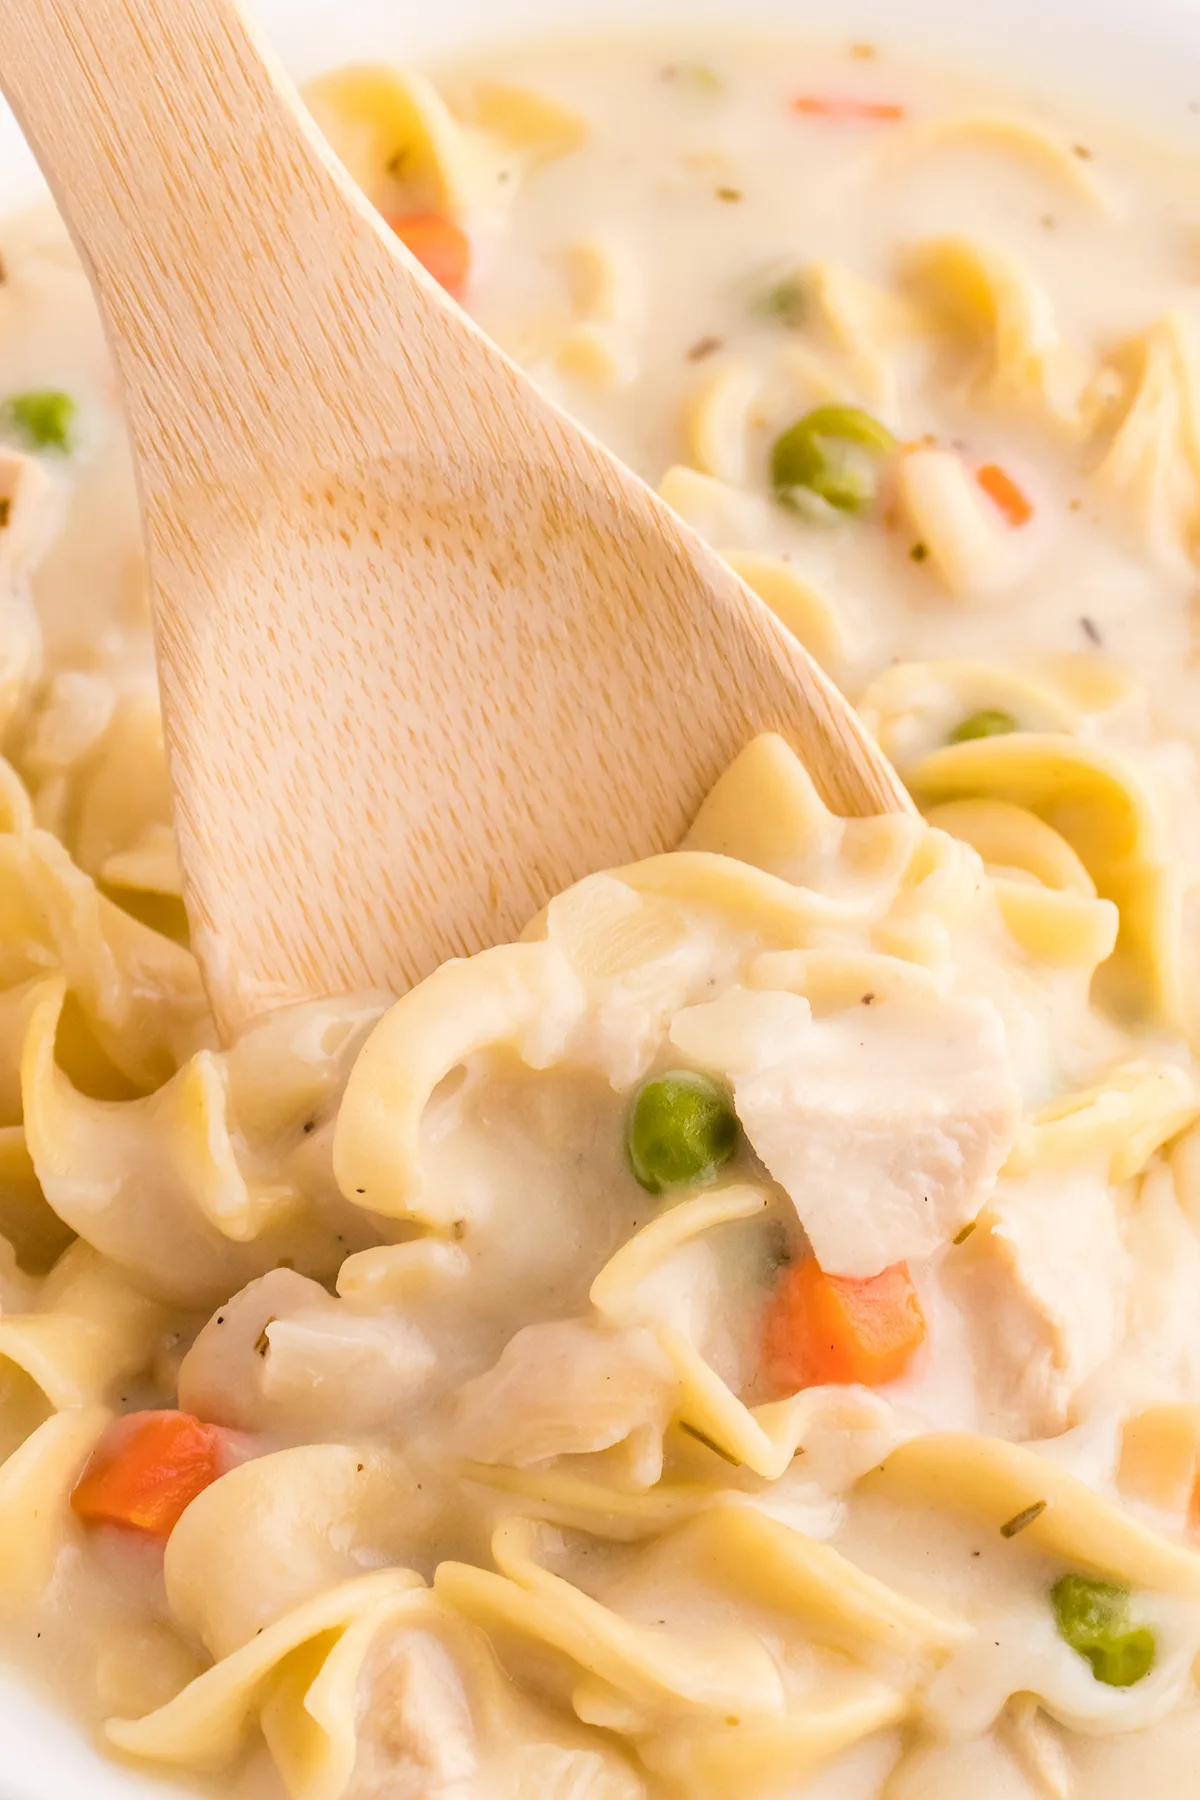 wooden spoon inserted into a pot of creamy chicken noodle soup with wide egg noodles, peas and carrots